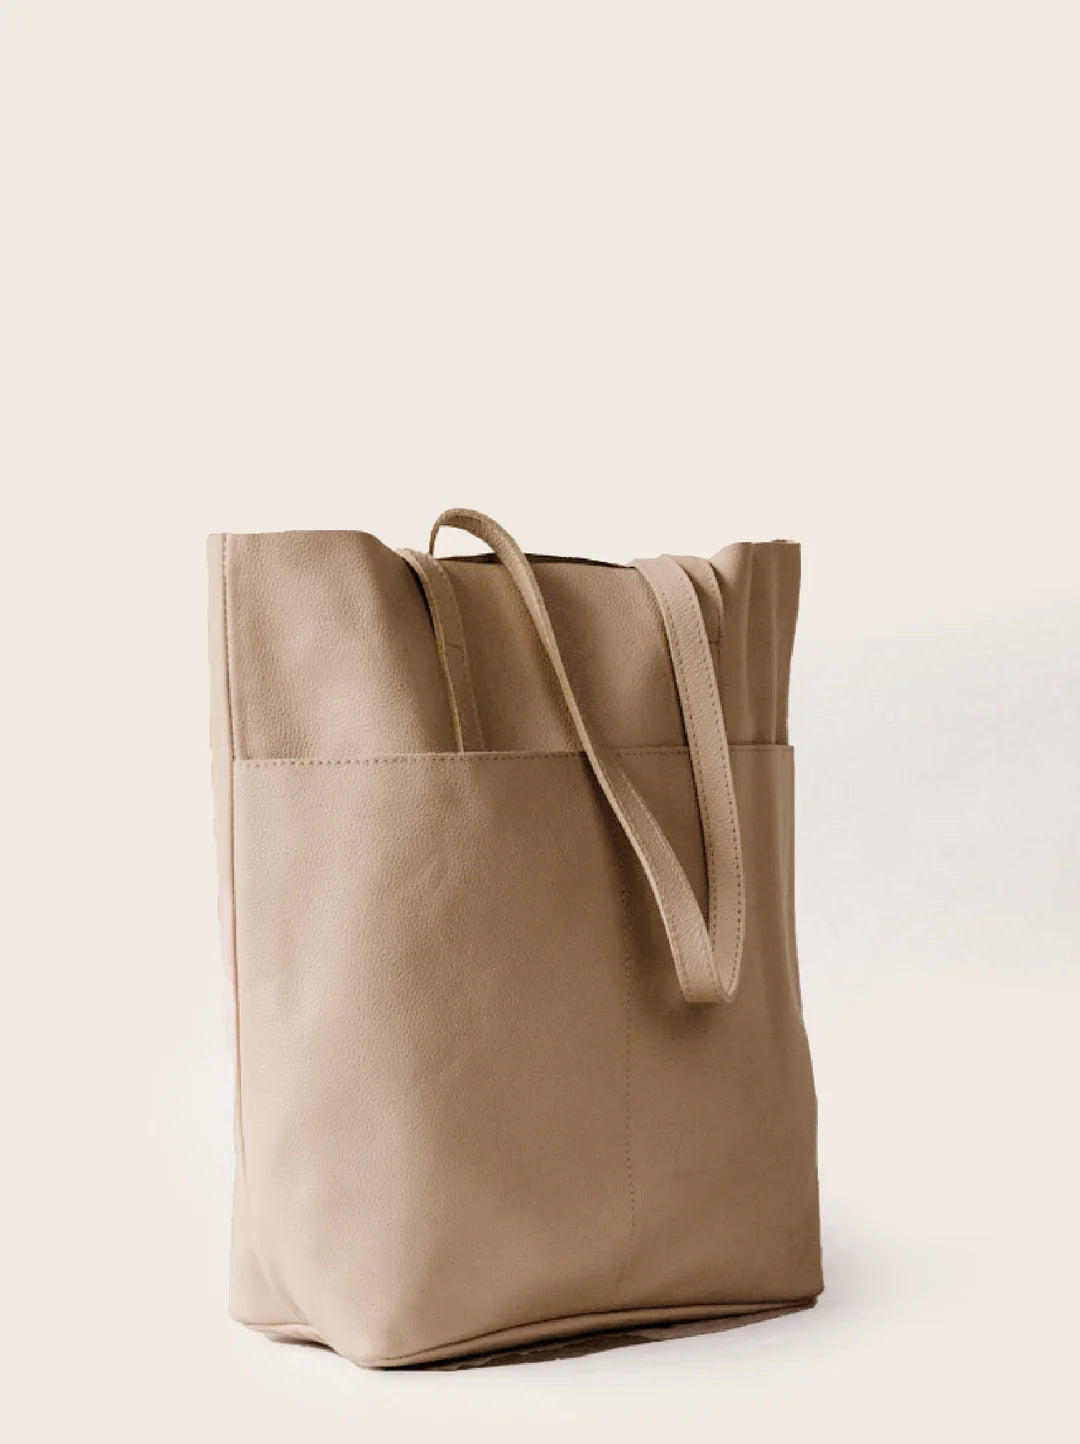 Selam Tote in Pebbled Driftwood